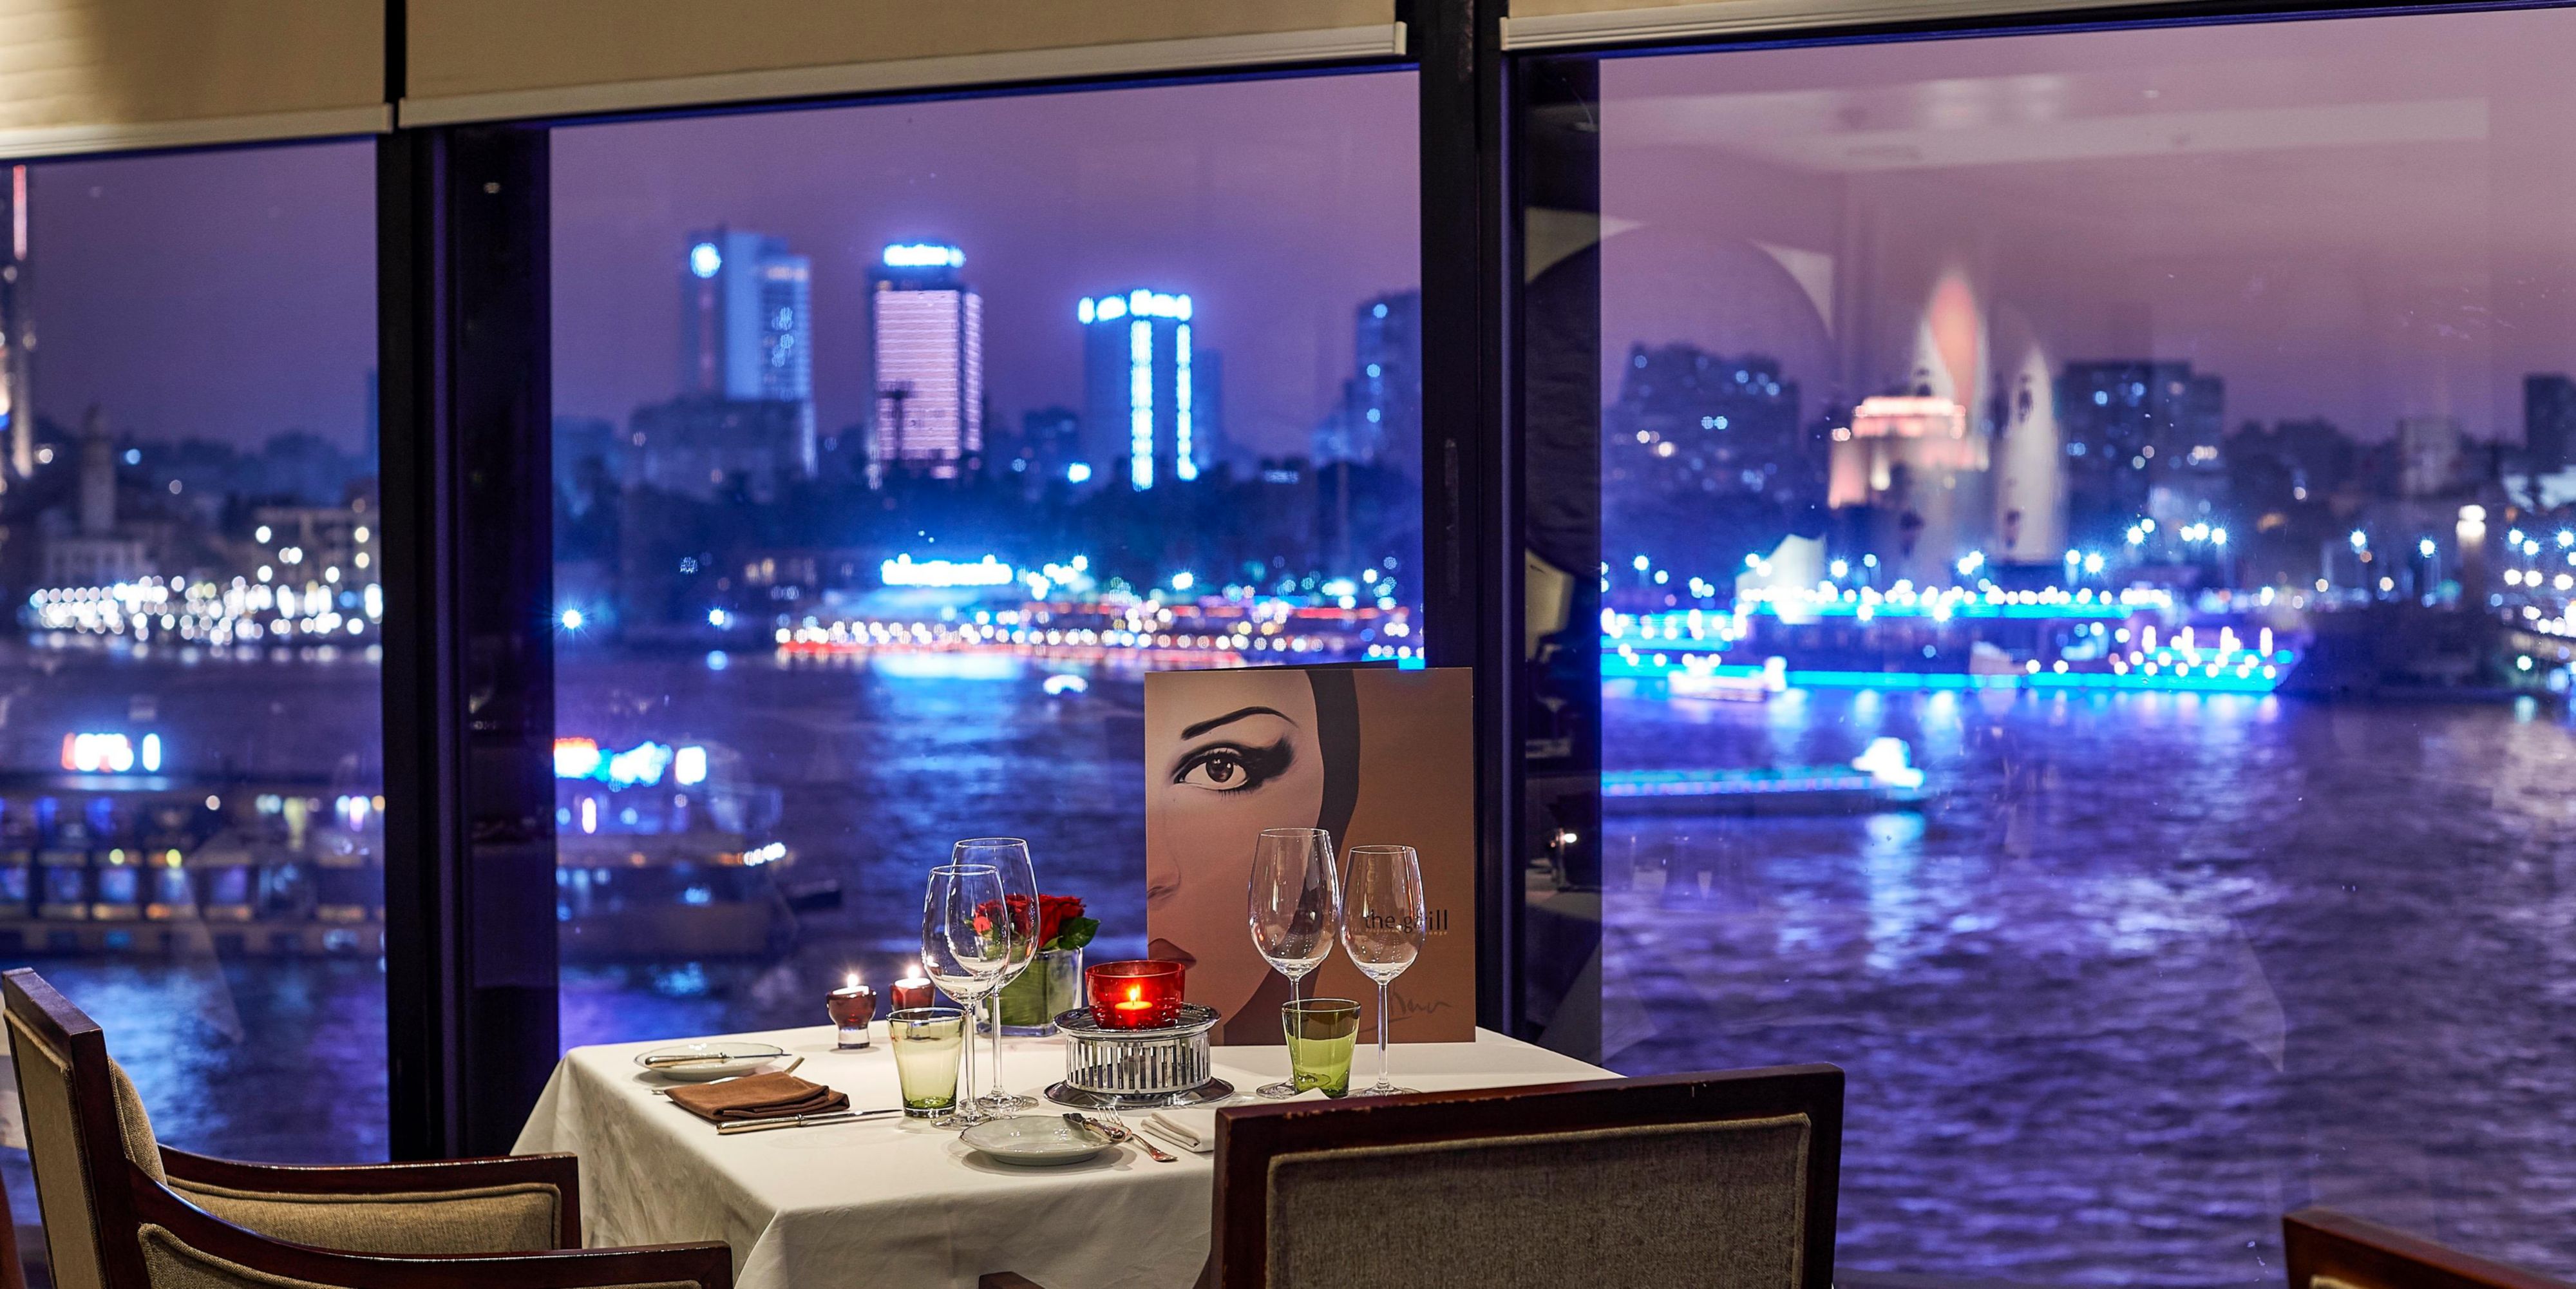 With its panoramic Nile views, elegant seating, and exquisite cuisine, the Grill is celebrated as one of the most romantic restaurants in Cairo. Offering contemporary, traditional, and brasserie French cuisine with an elegant view of the majestic Nile, The Grill crafts its dishes with only the finest ingredients.